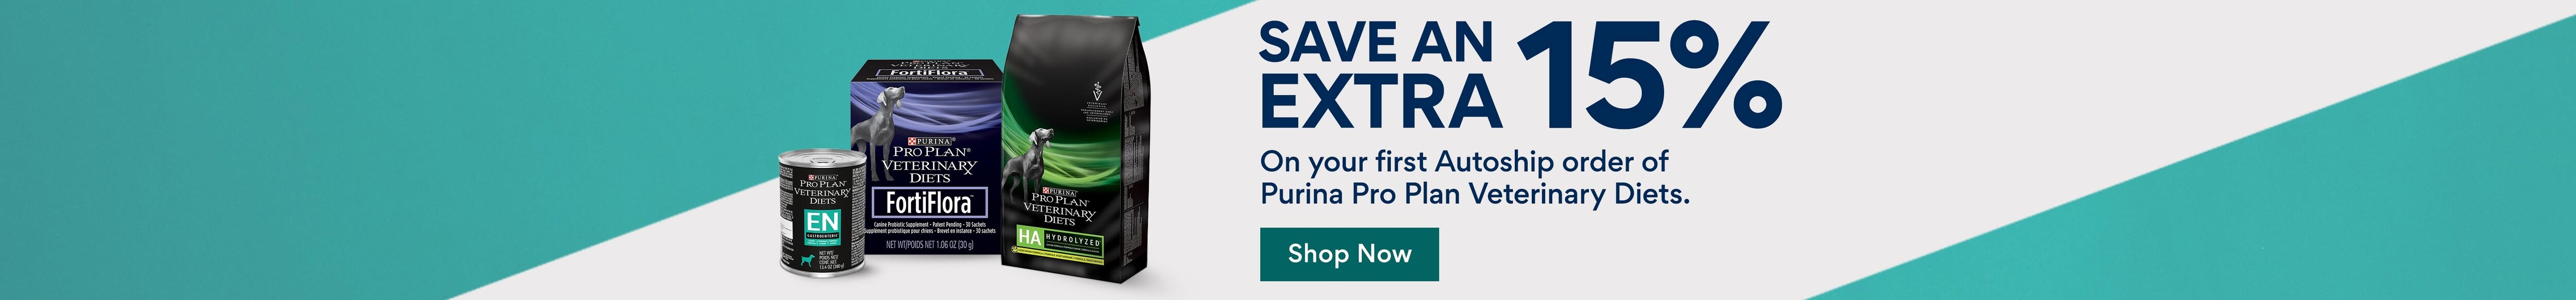 Save an extra fifteen percent off on your first Autoship order of Purina Pro Plan Veterinary Diets. Shop Now.